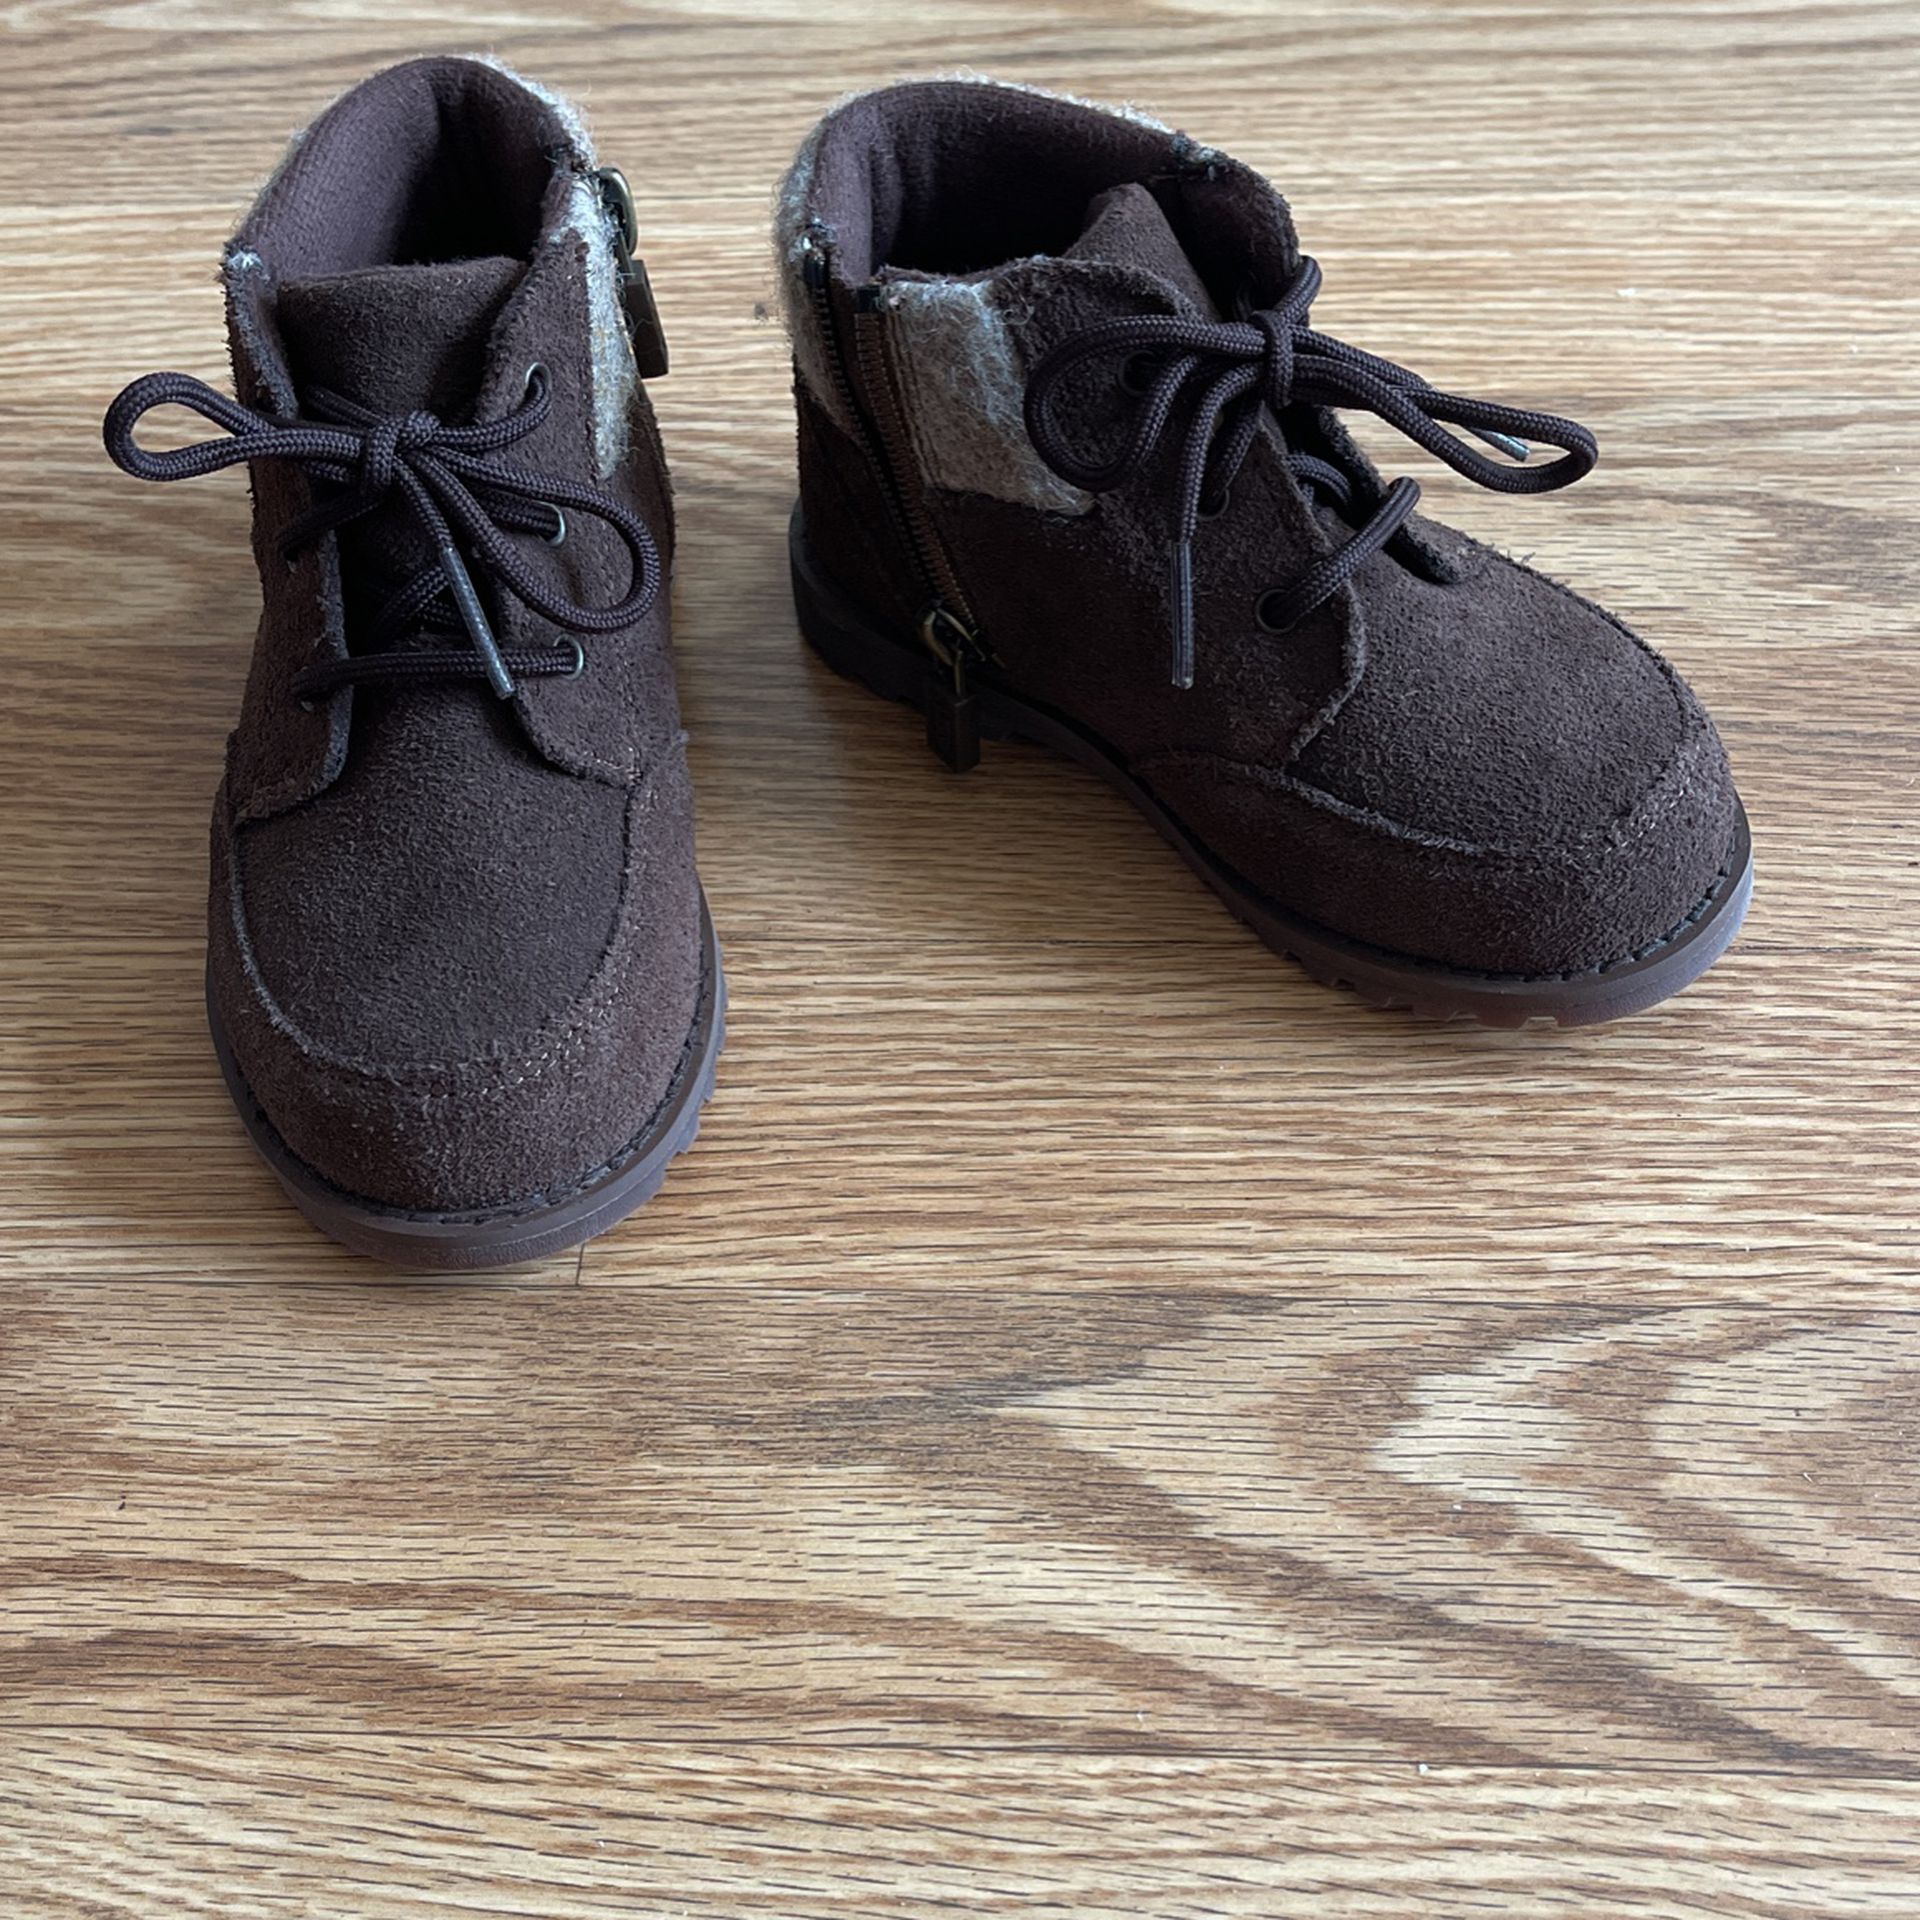 Toddler UGG Boots